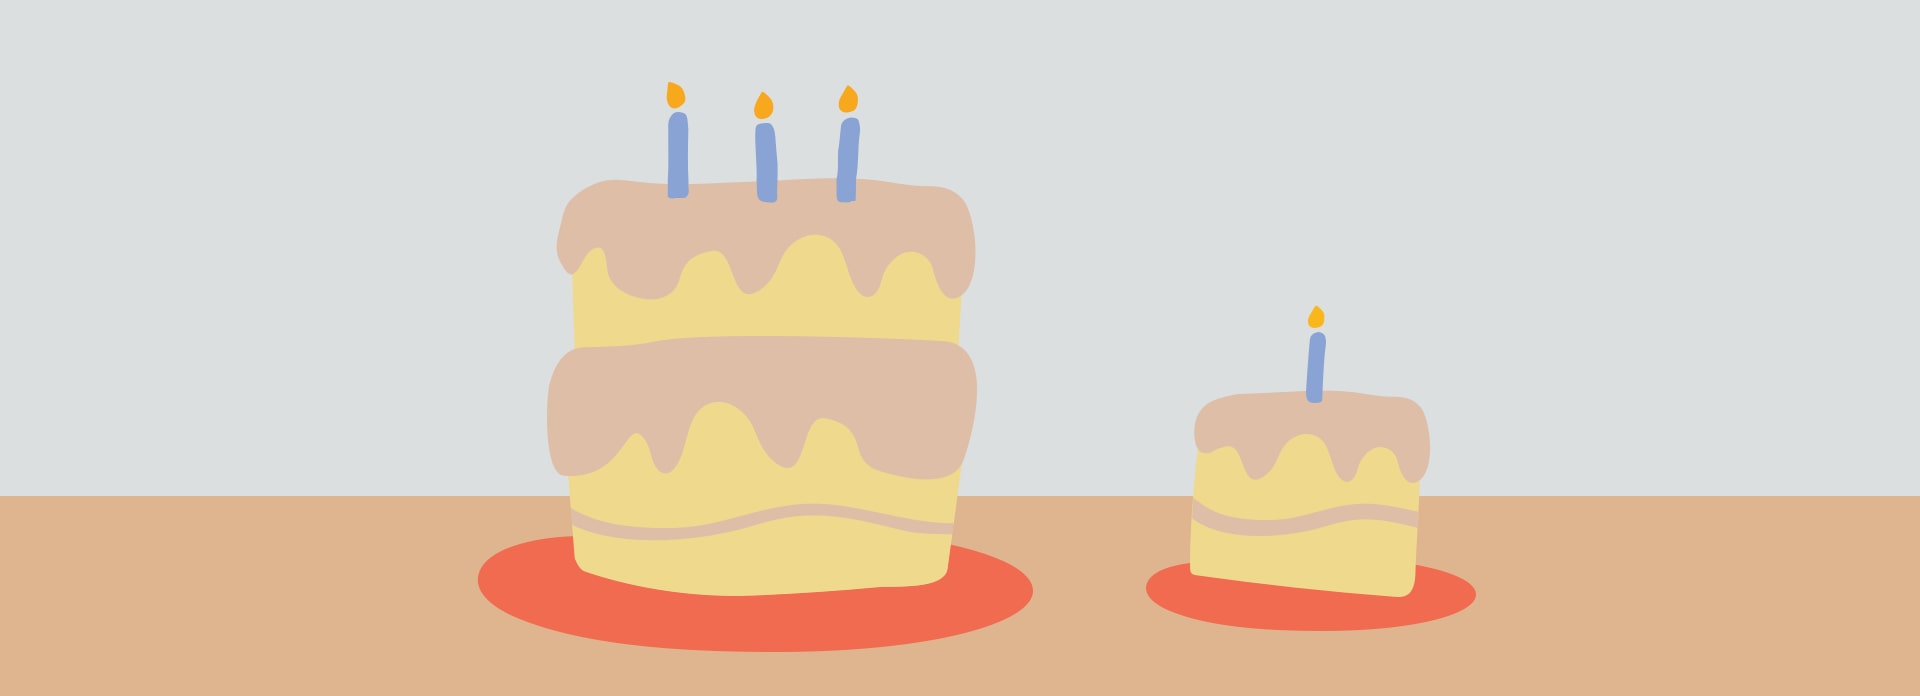 An illustration of a birthday cake.